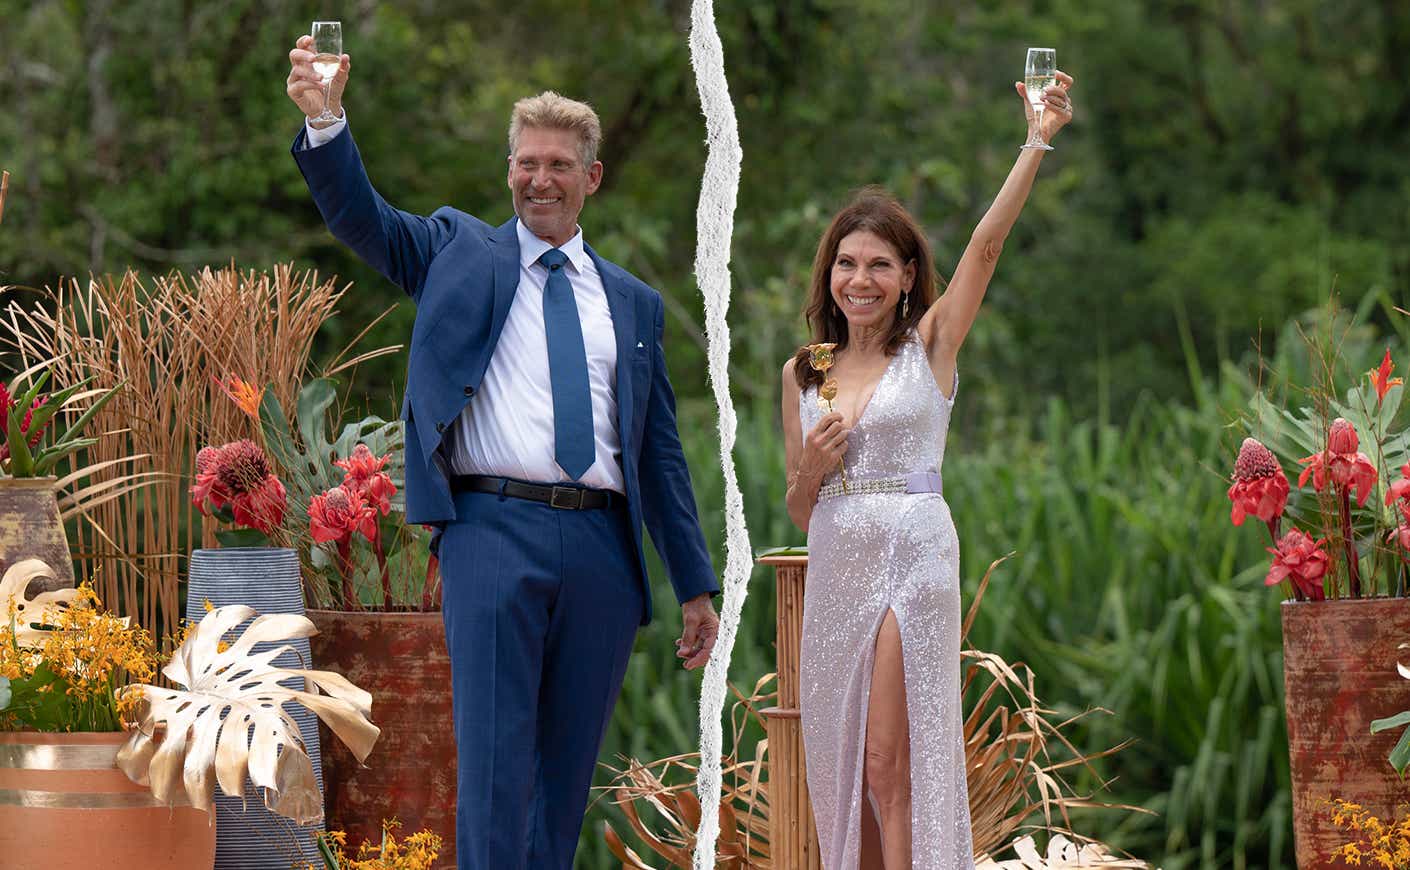 Gerry Turner and Theresa Nist holding up champagne glasses, with the paper between them torn